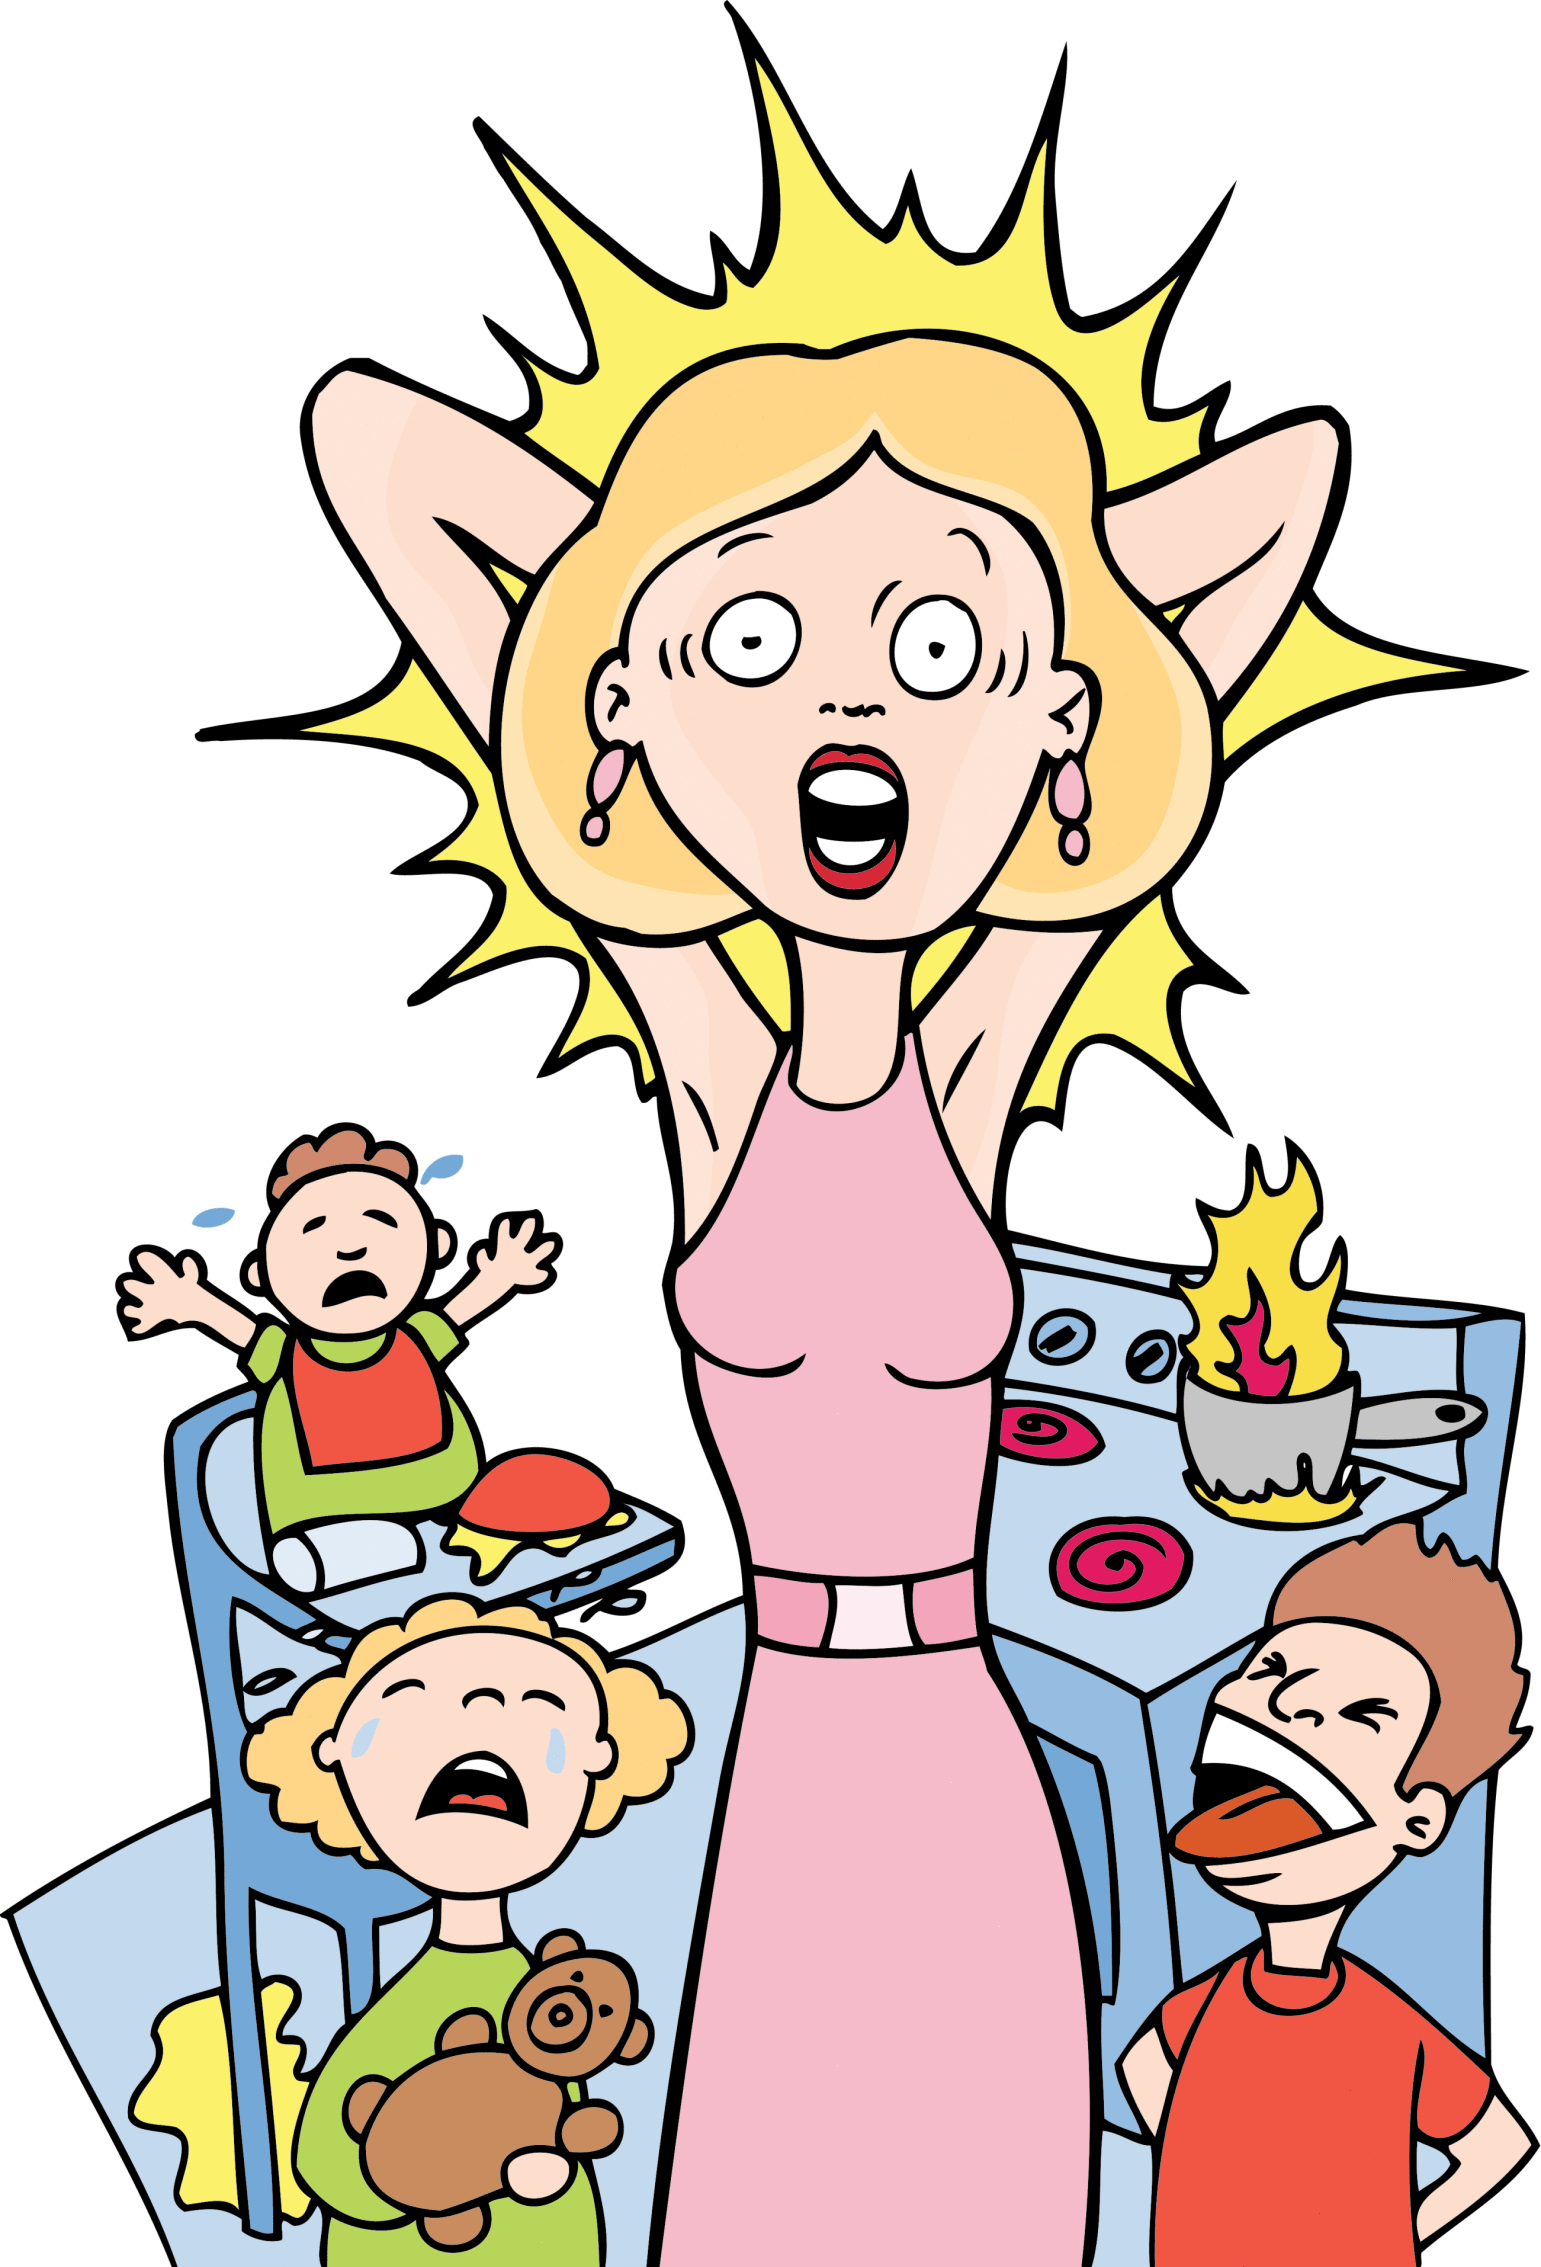 Kids driving people crazy clipart